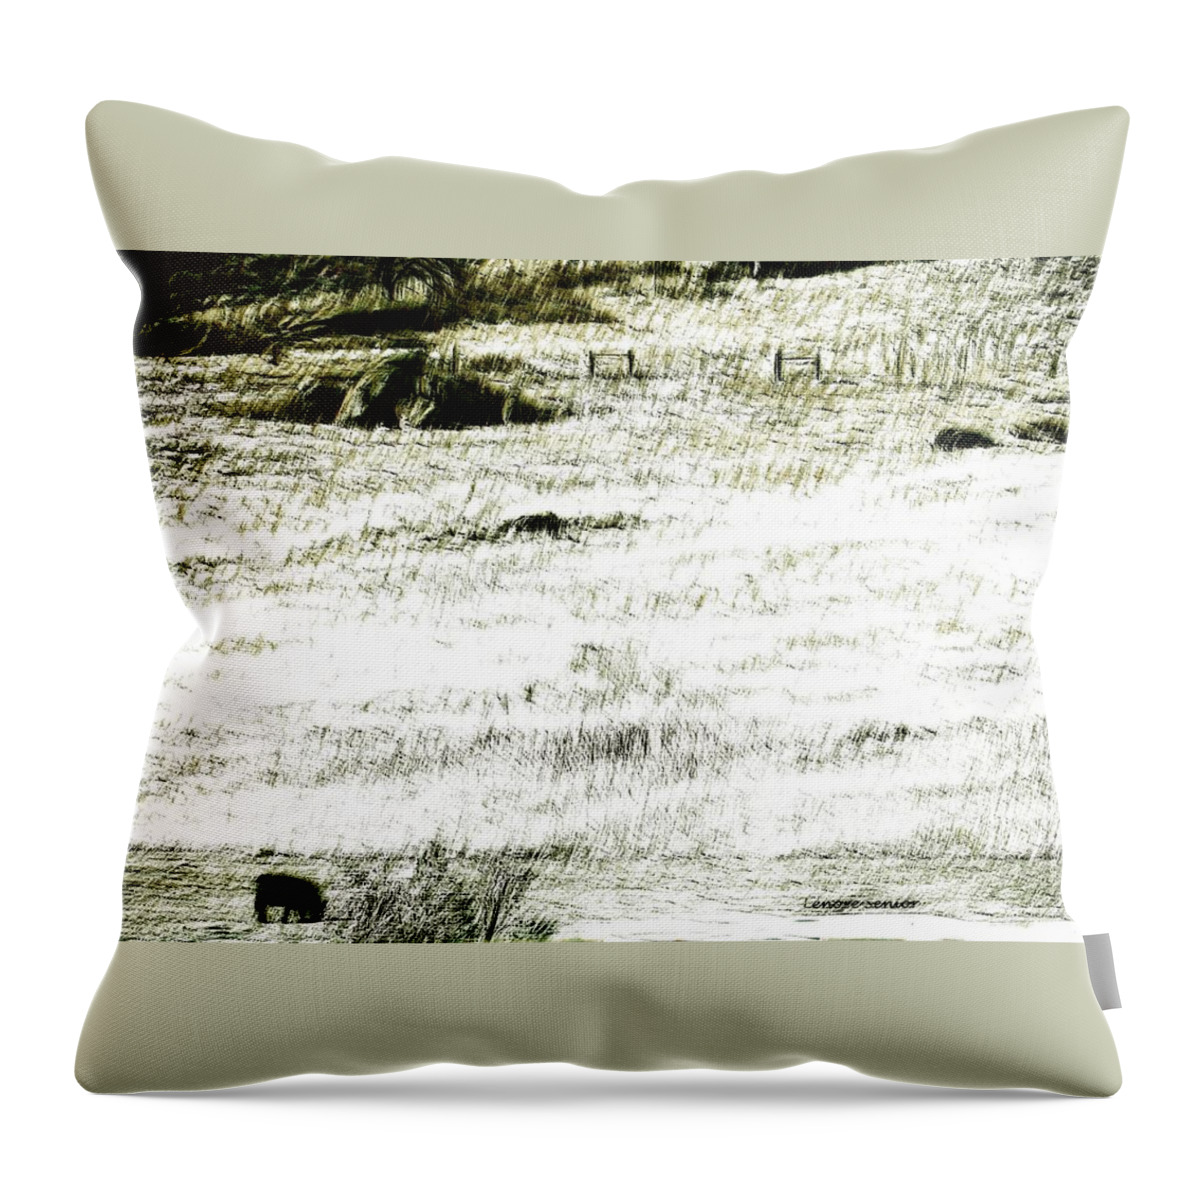 Minimal Throw Pillow featuring the photograph Winter Range by Lenore Senior